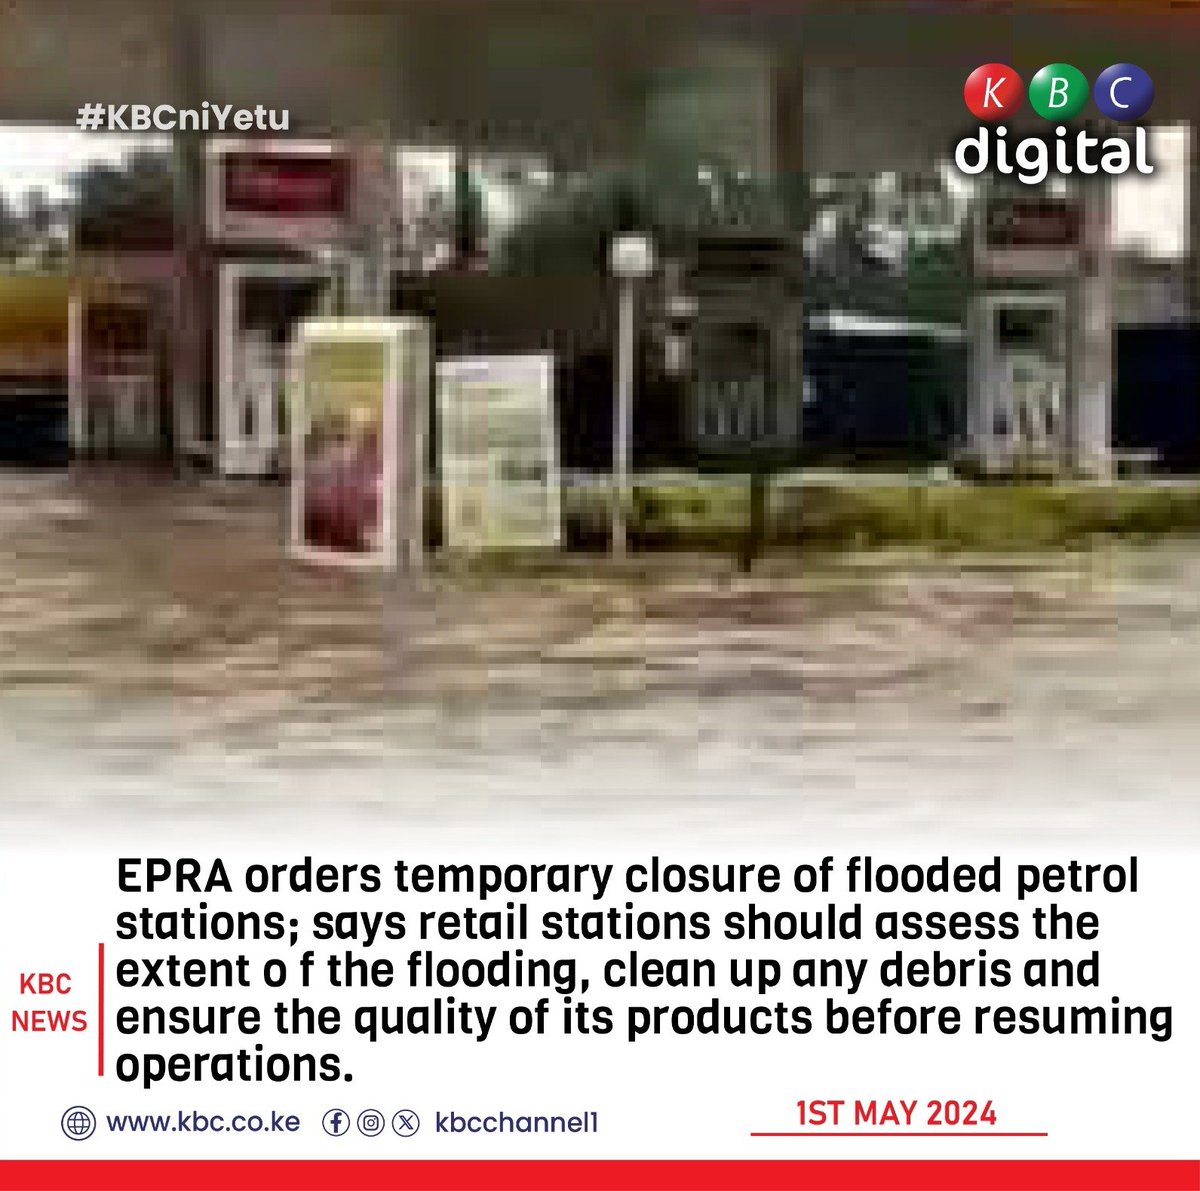 EPRA orders temporary closure of flooded petrol stations; says retail stations should assess the extent of the flooding, clean up any debris and ensure the quality of its products before resuming operations.
#KBCniYetu ^RO